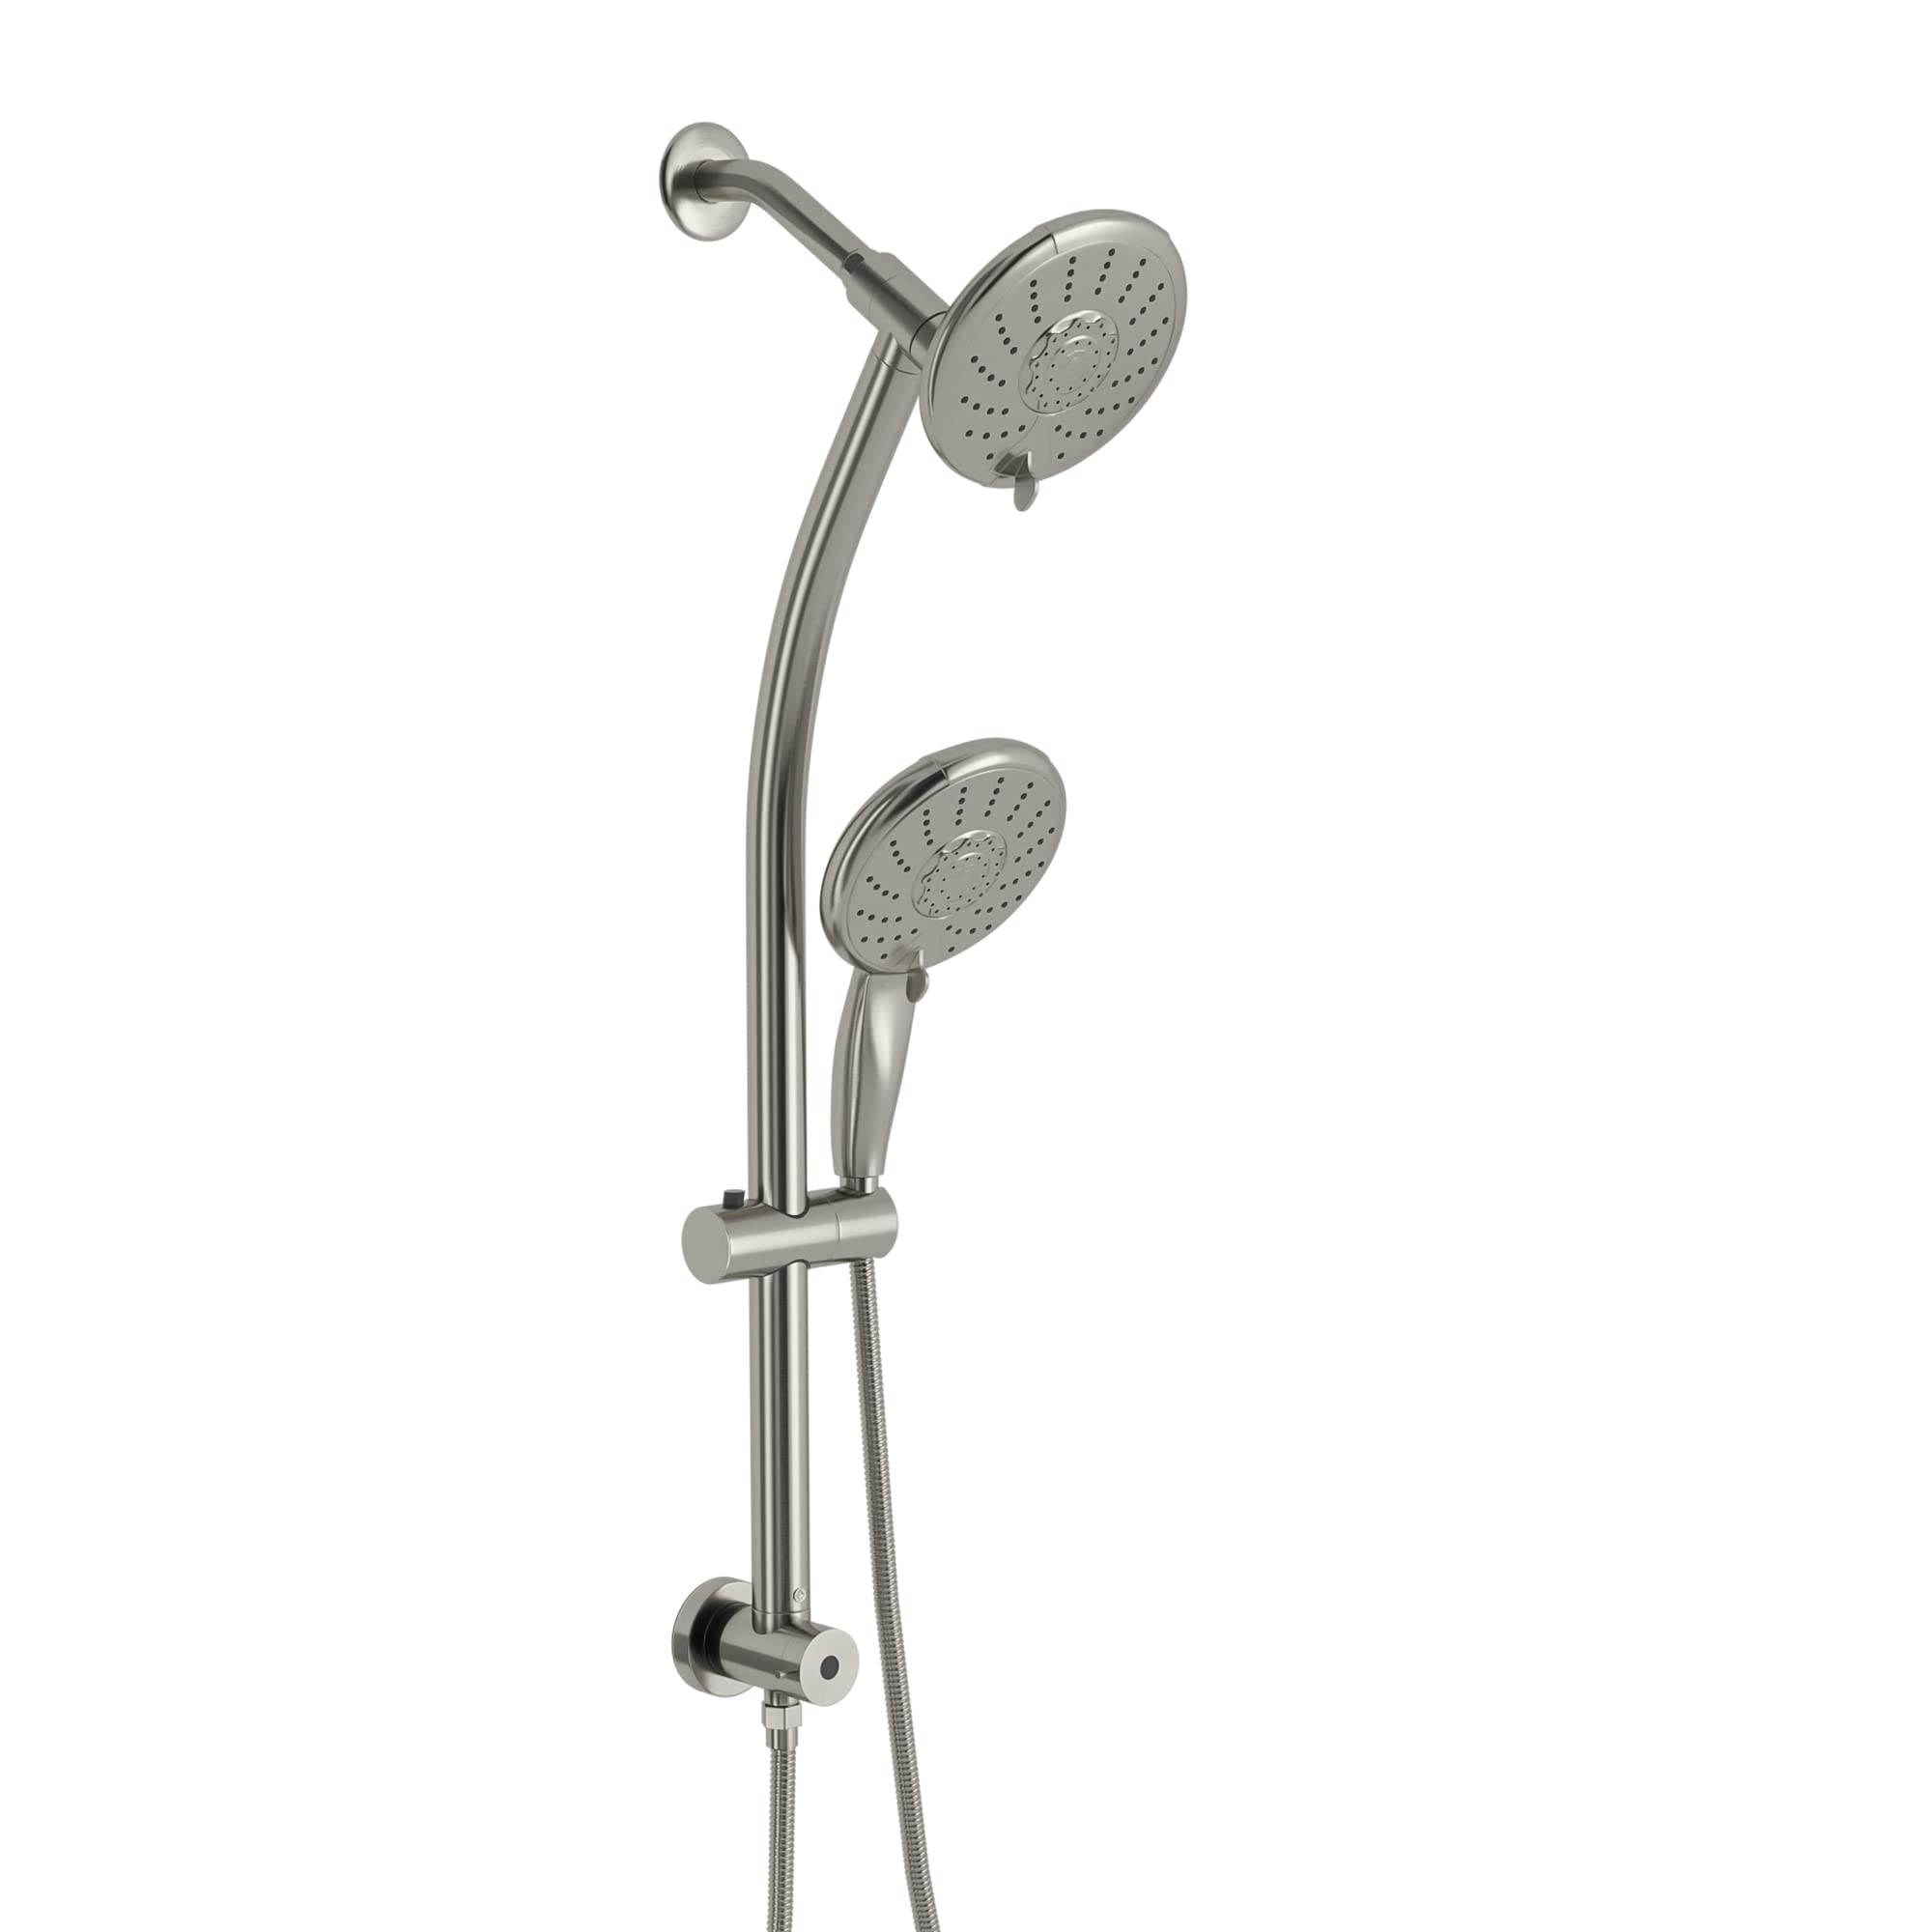 Lordear 5 Setting Rain Shower Head with Handheld Spray and 3-Way Water Diverter, Brushed Nickel Finish | Shower Head | Lordear